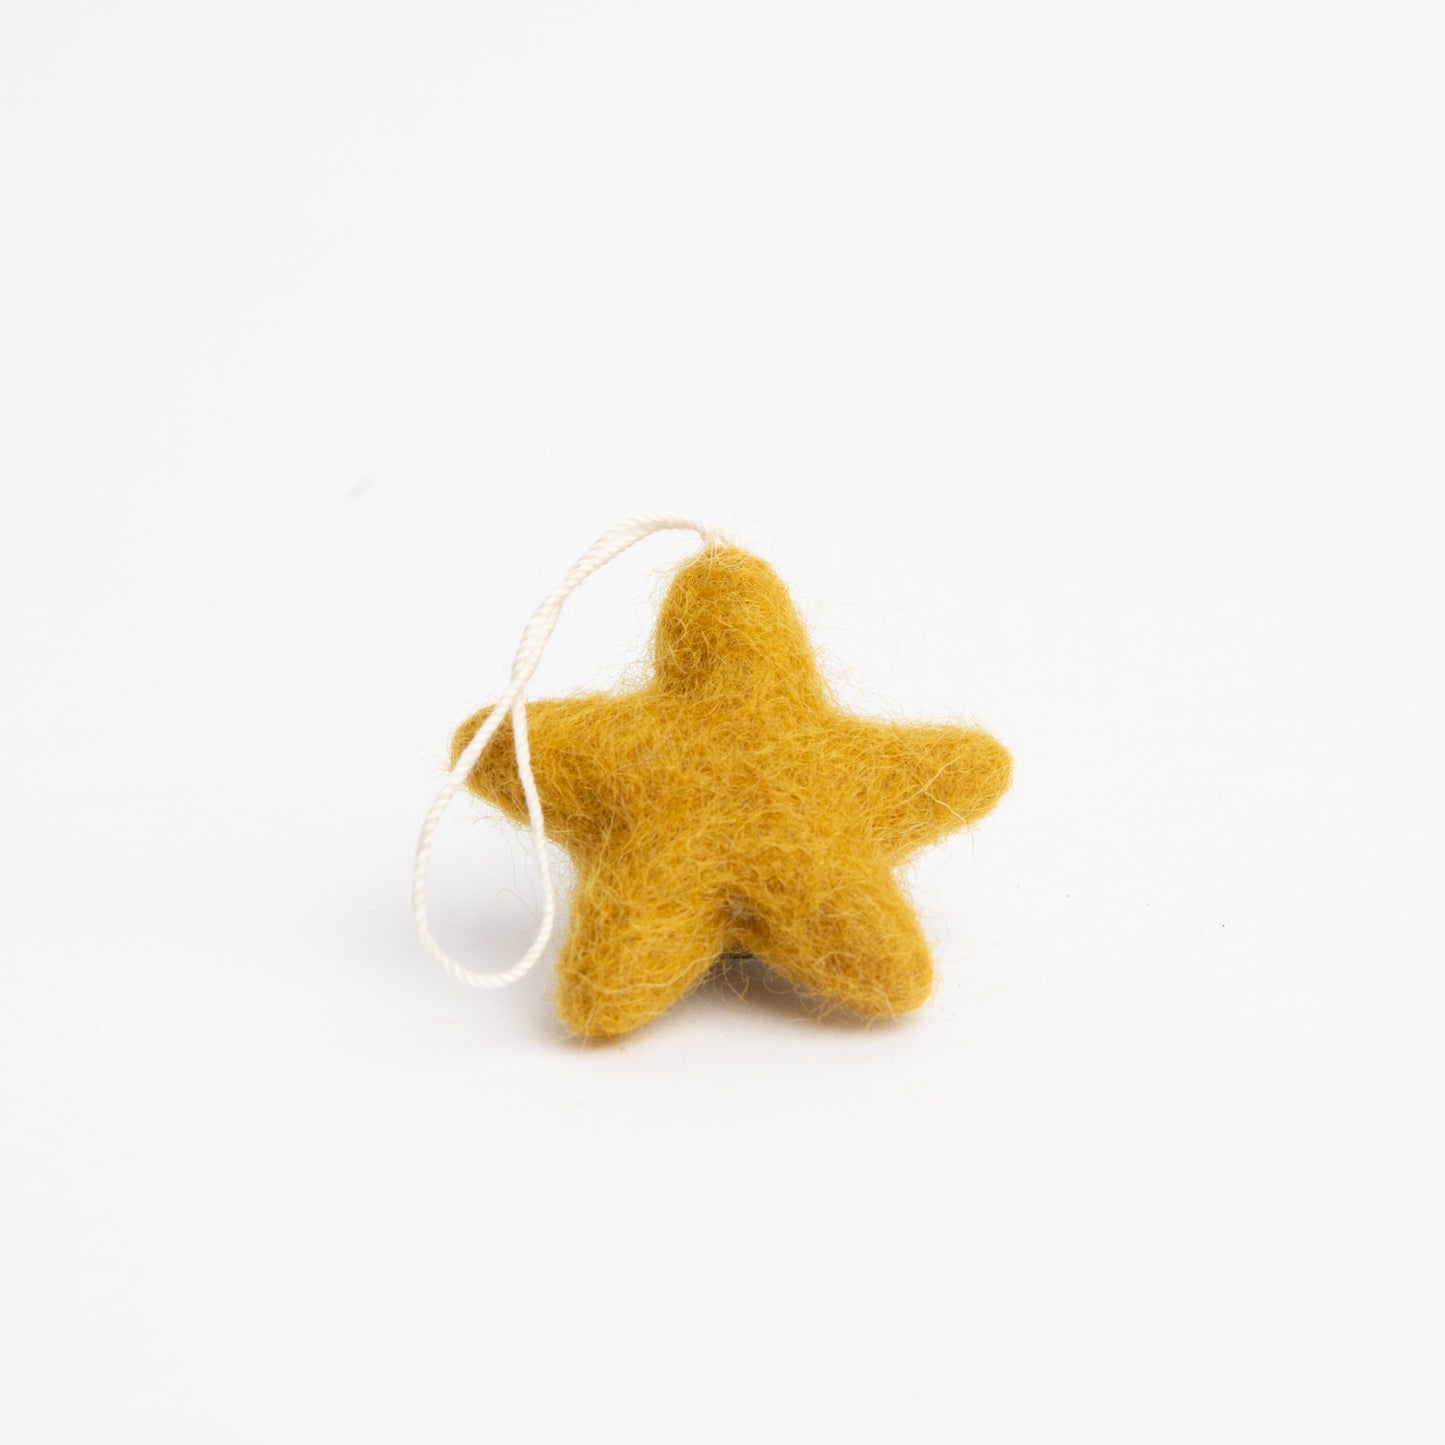 Harvest Gold Felted Wool Star Ornament